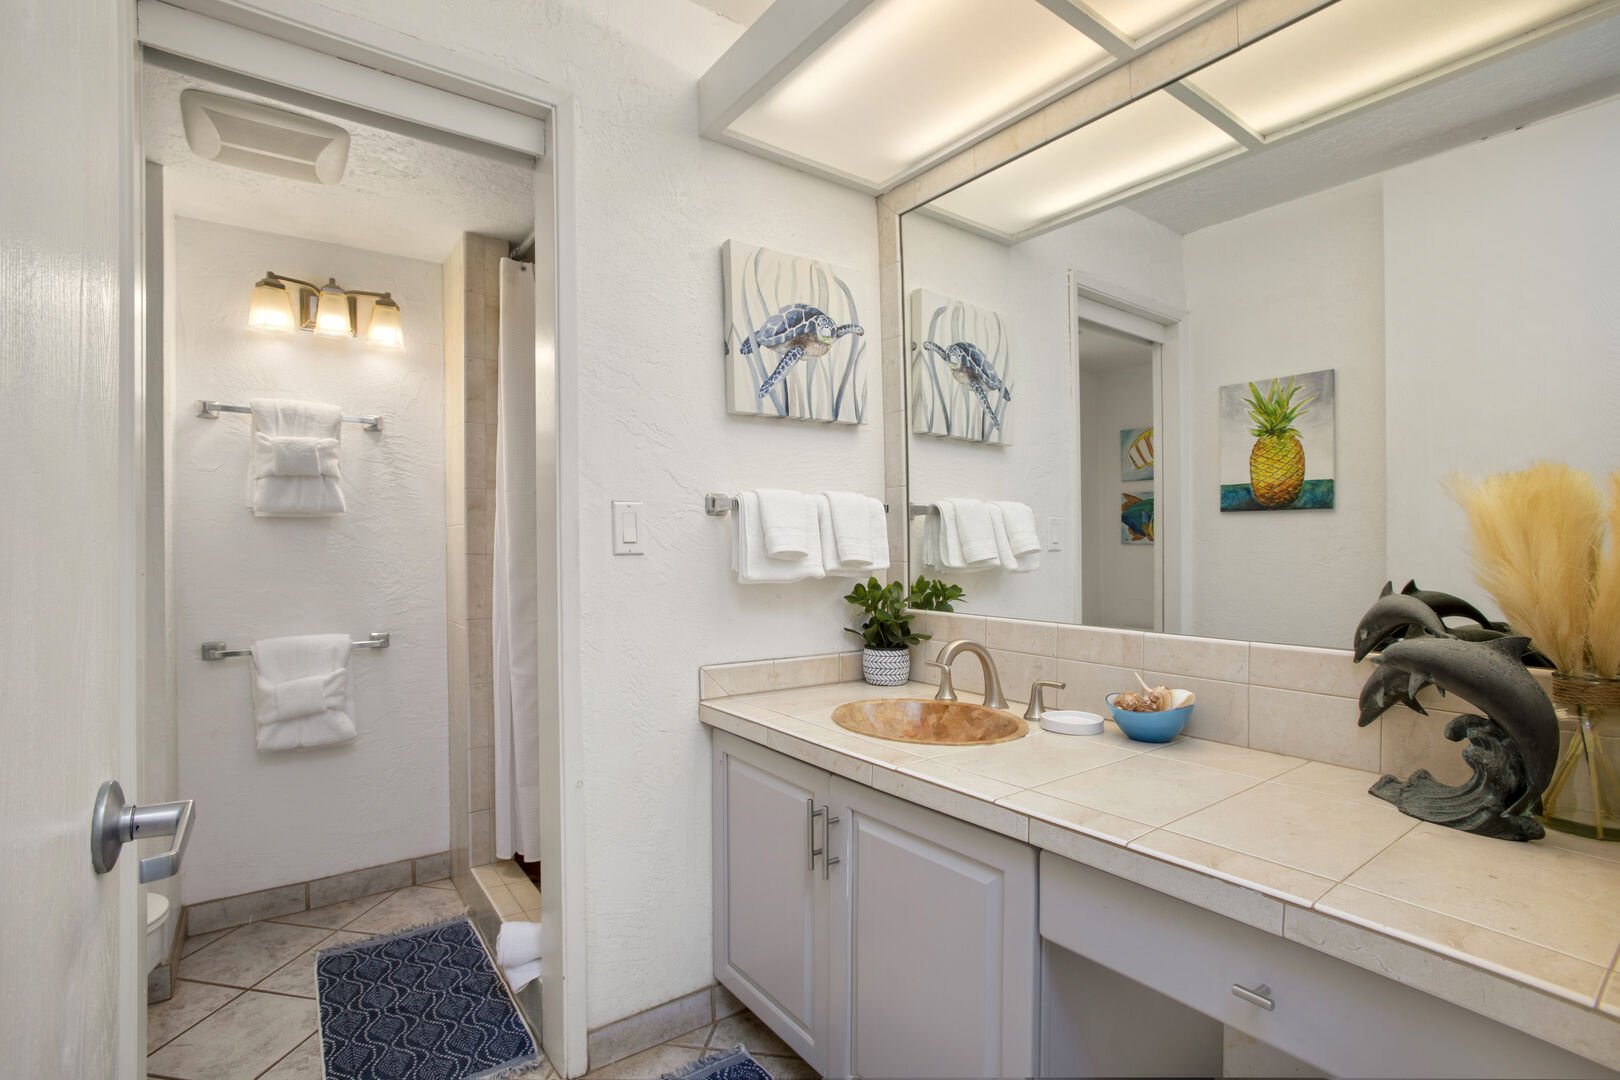 The full bathroom features a vanity with cabinet and a walk-in shower!